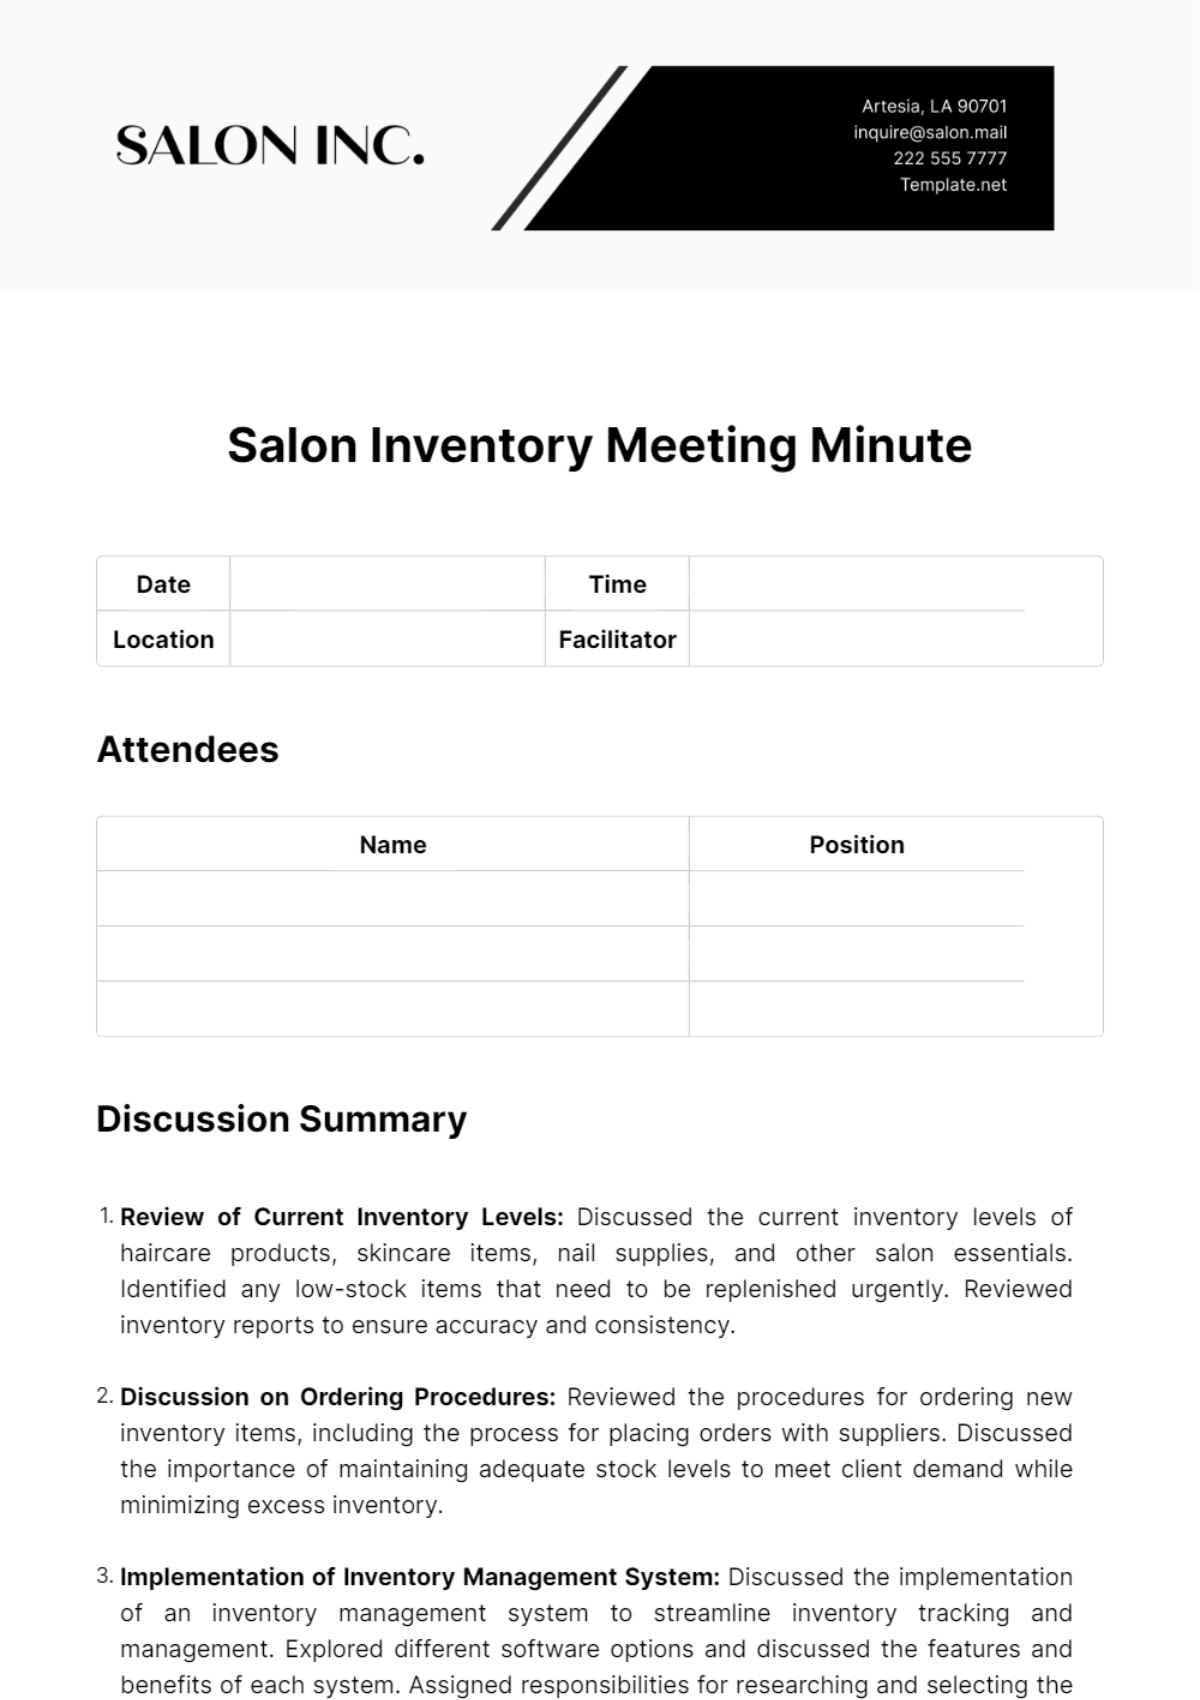 Free Salon Inventory Meeting Minute Template